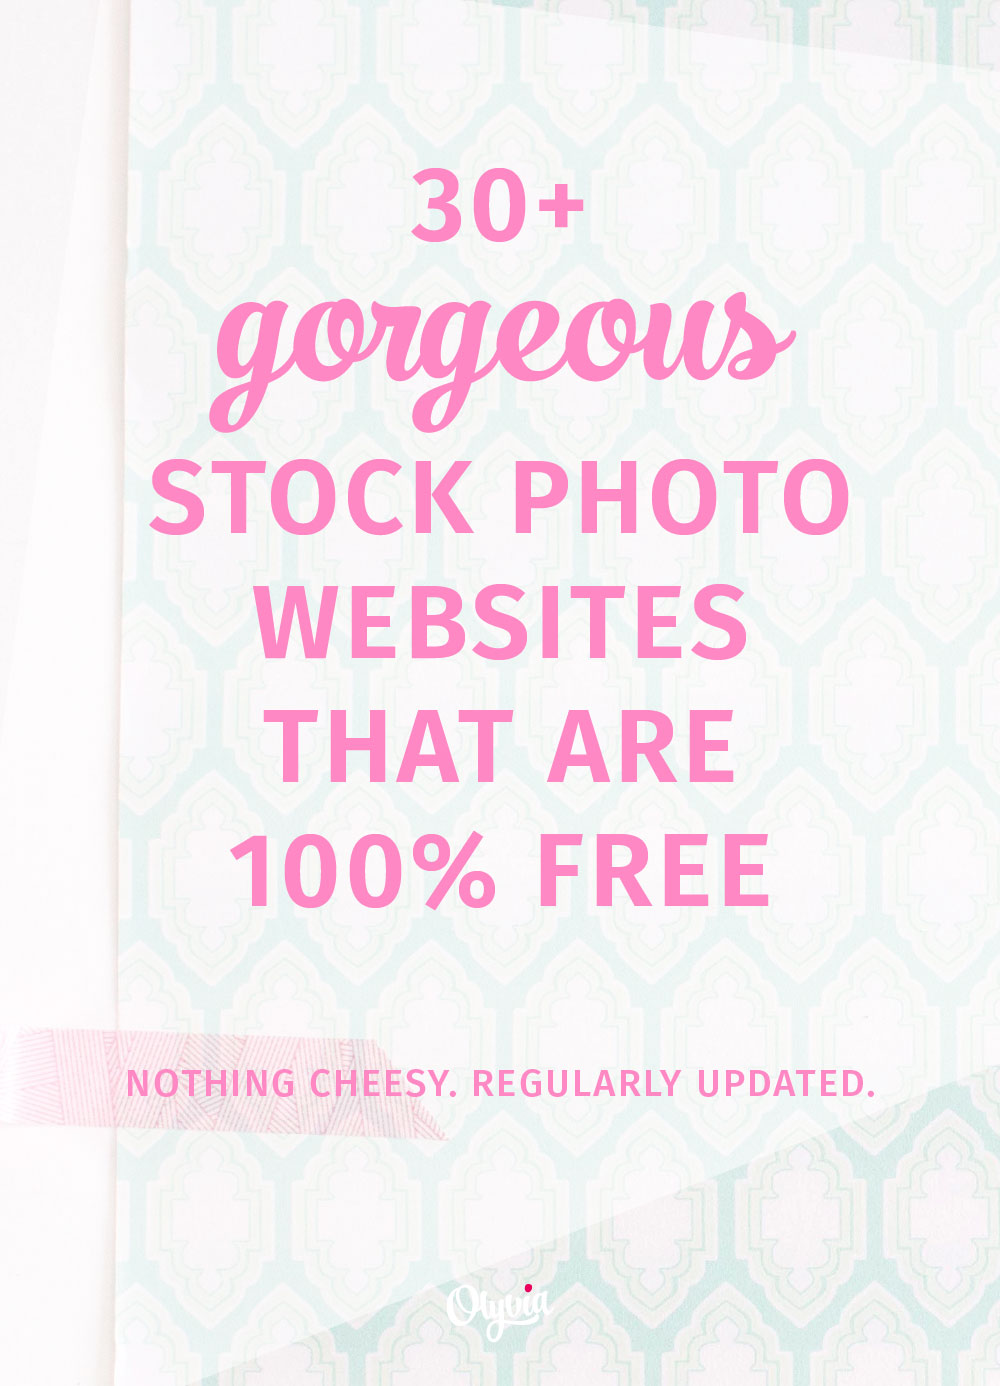 30+ of the best free stock photo websites for your blog and business. (Regularly updated!) Nothing but gorgeous stock photos!